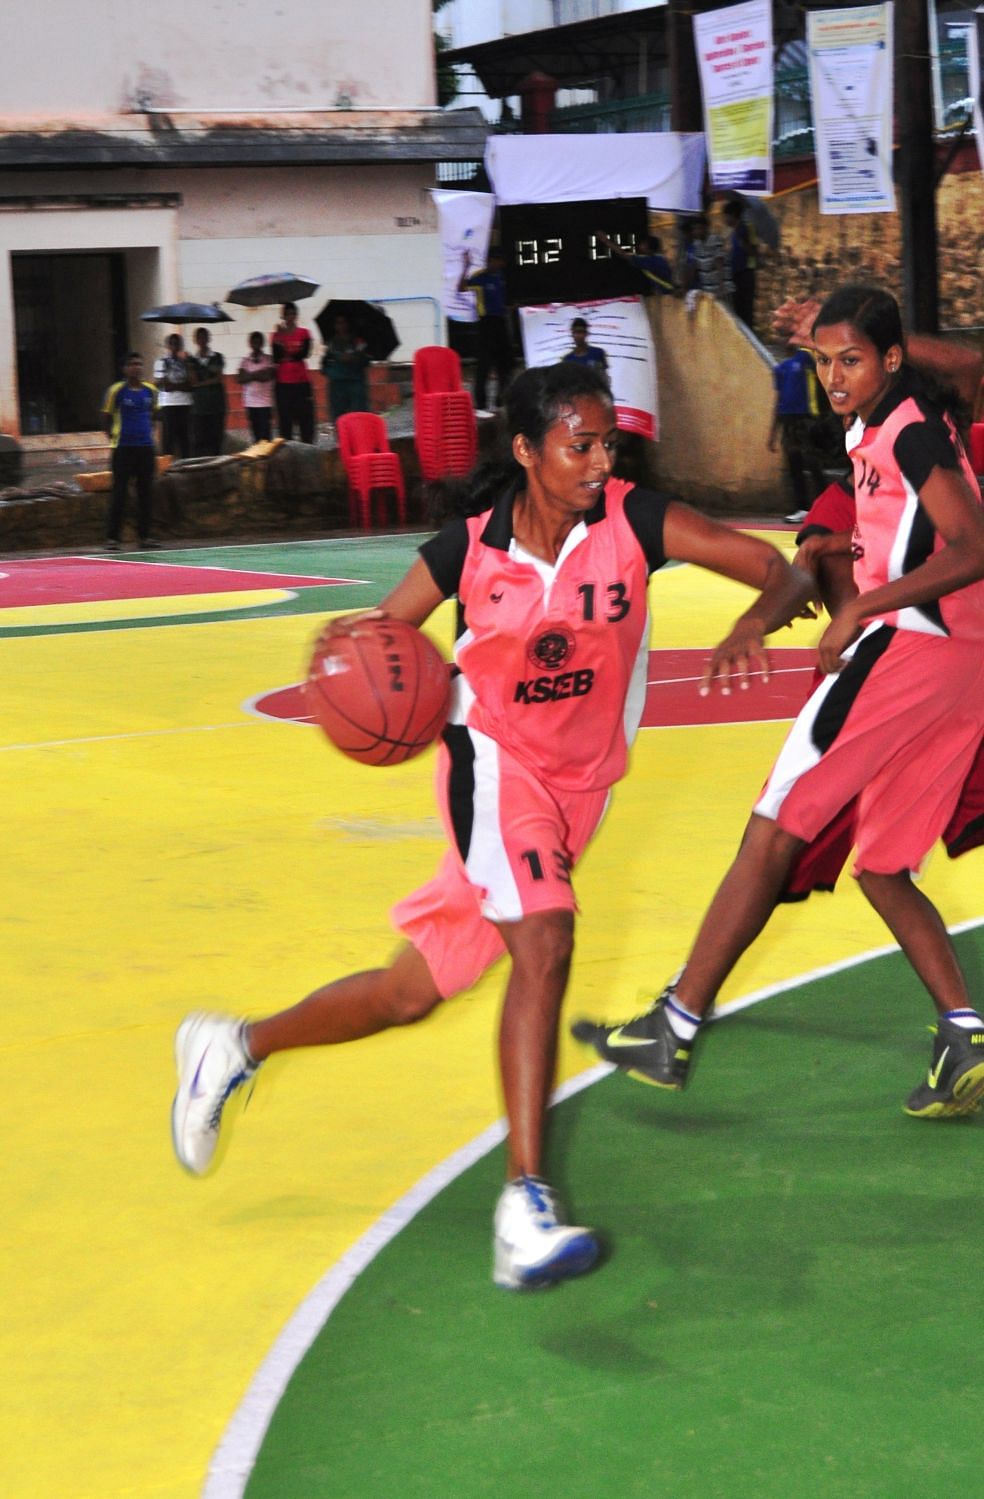 Ligy Mathew for KSEB in the opening match of the 1st All India Midhun Markose Basketball Championships. Photo Courtesy: Kerala Basketball Association